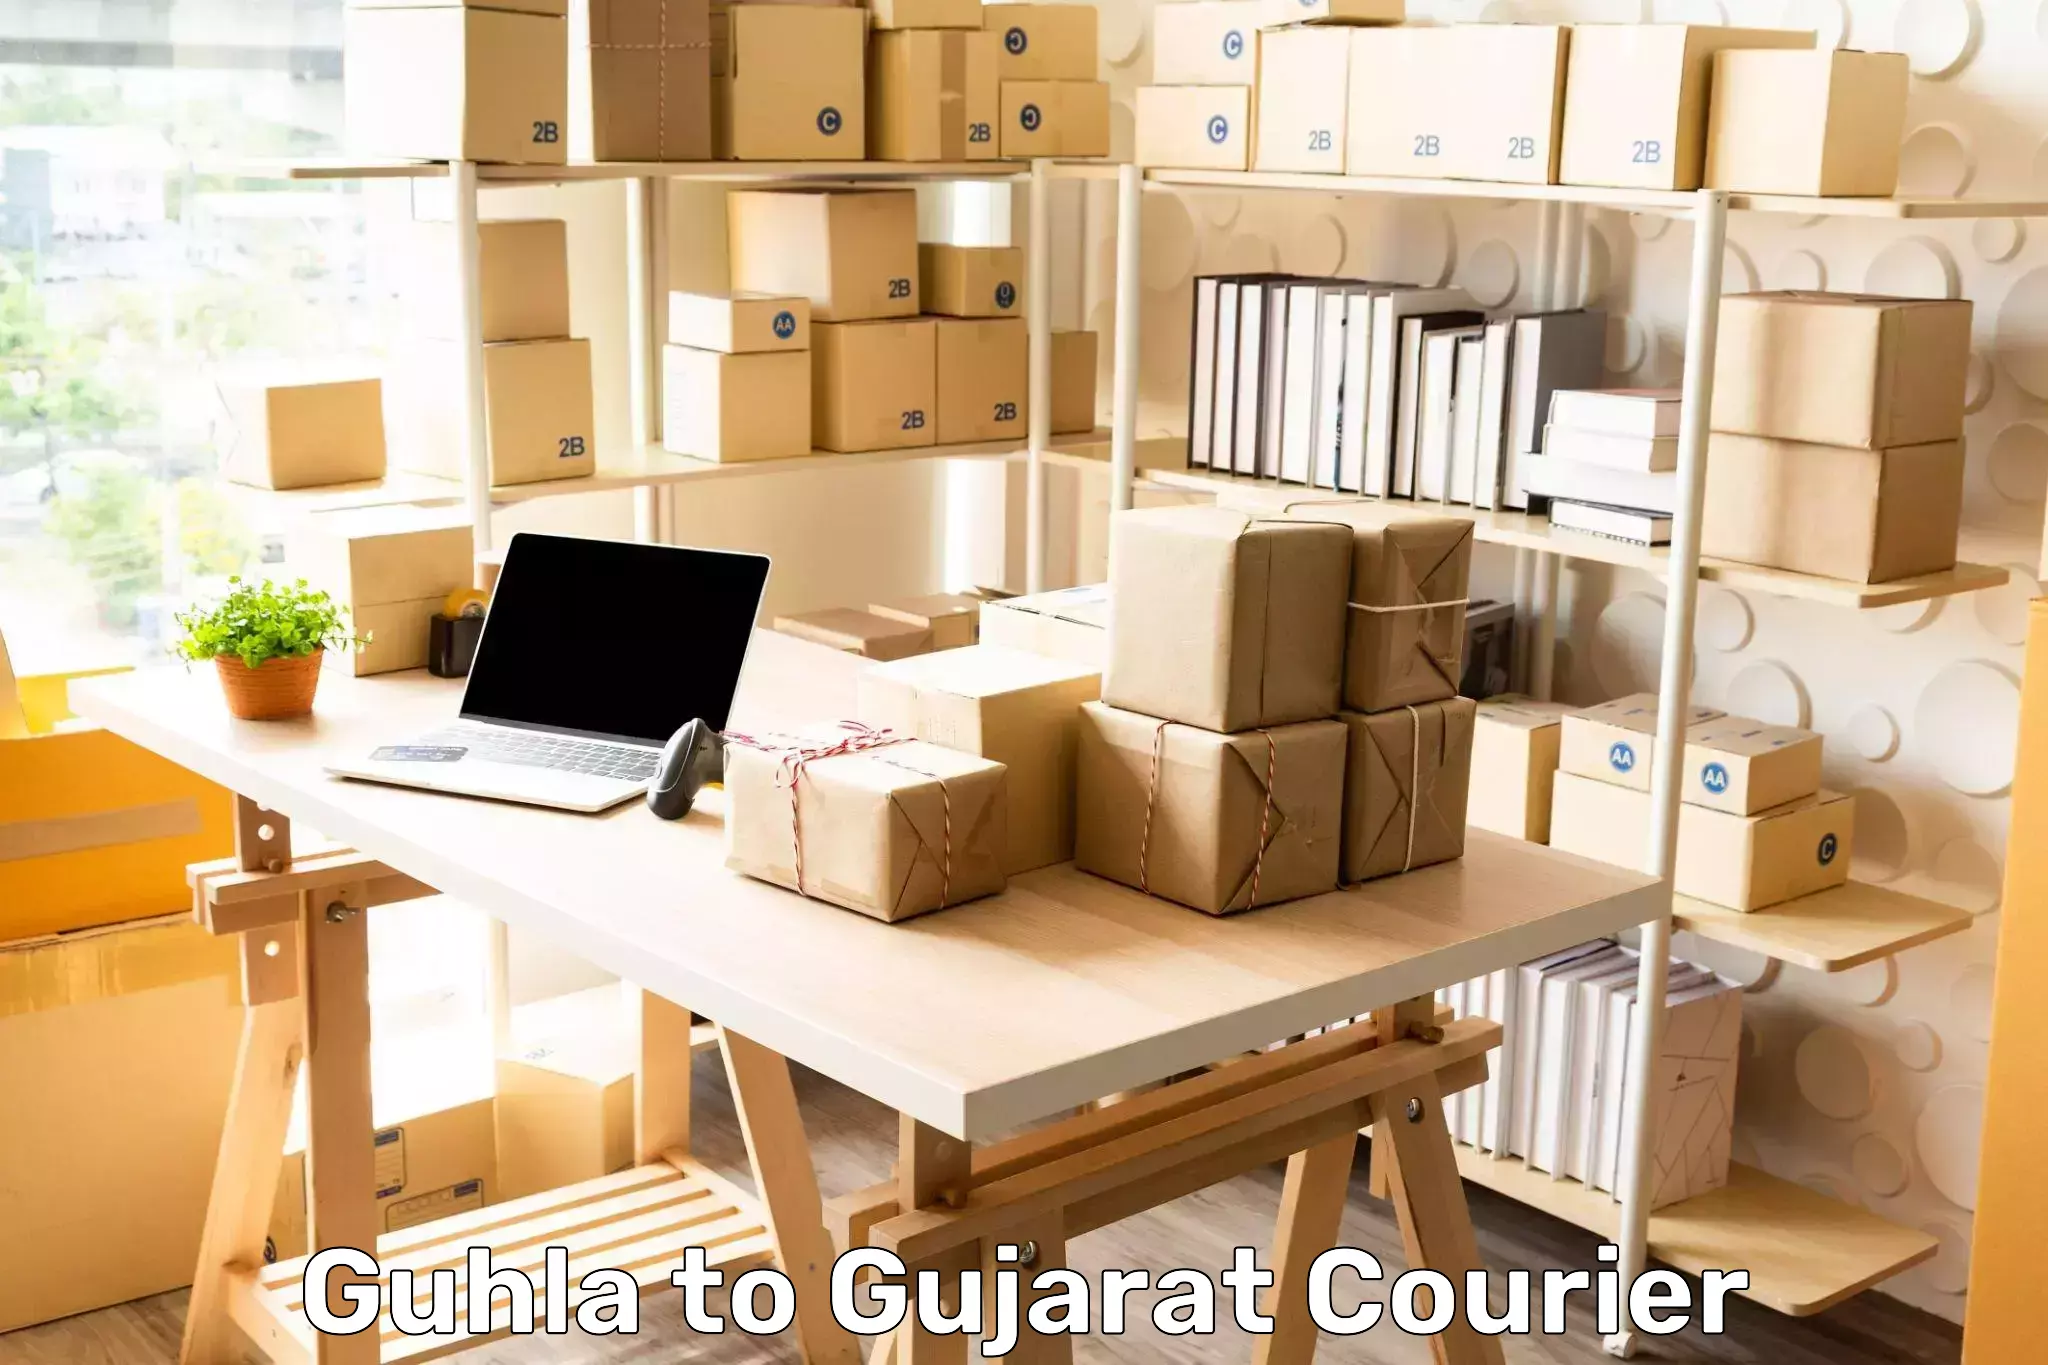 Courier service comparison Guhla to Ahmedabad